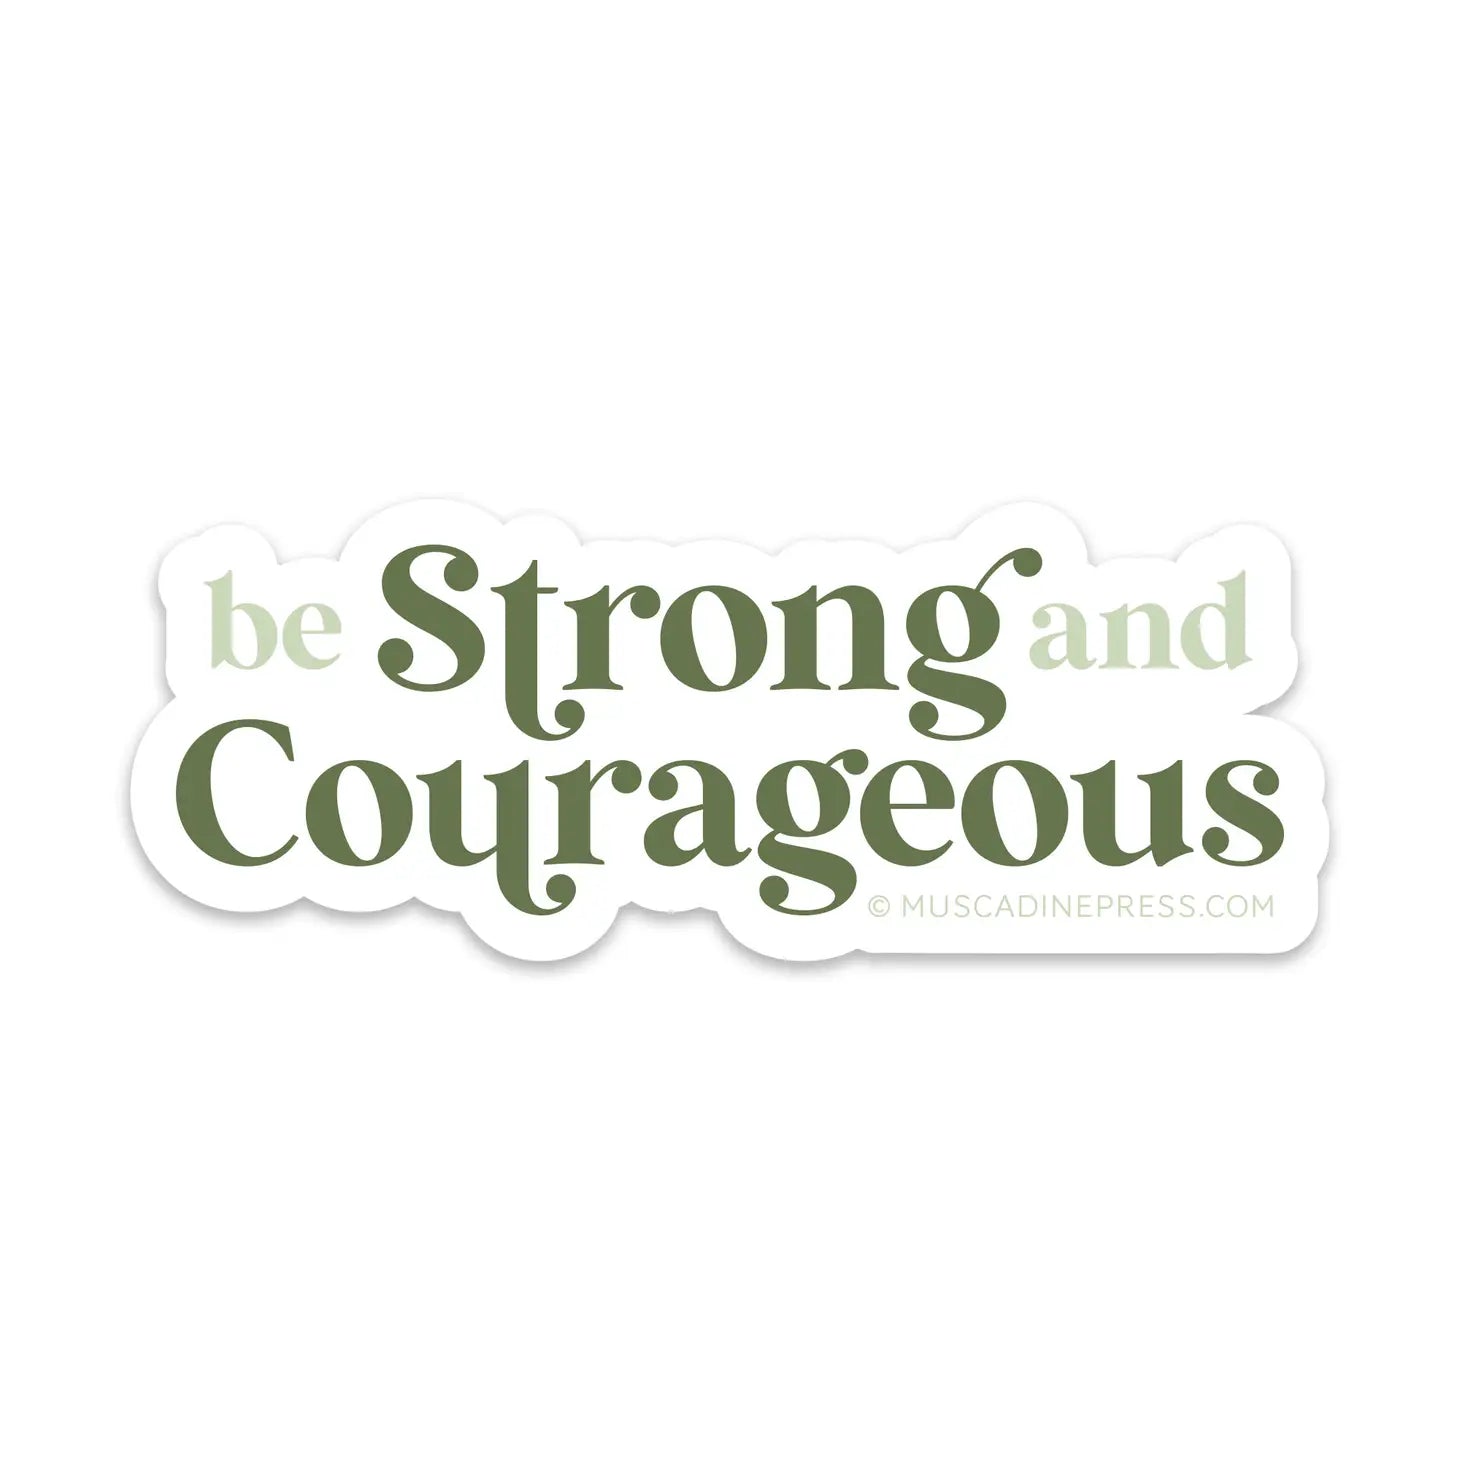 Vinyl Sticker - Be Strong and Courageous